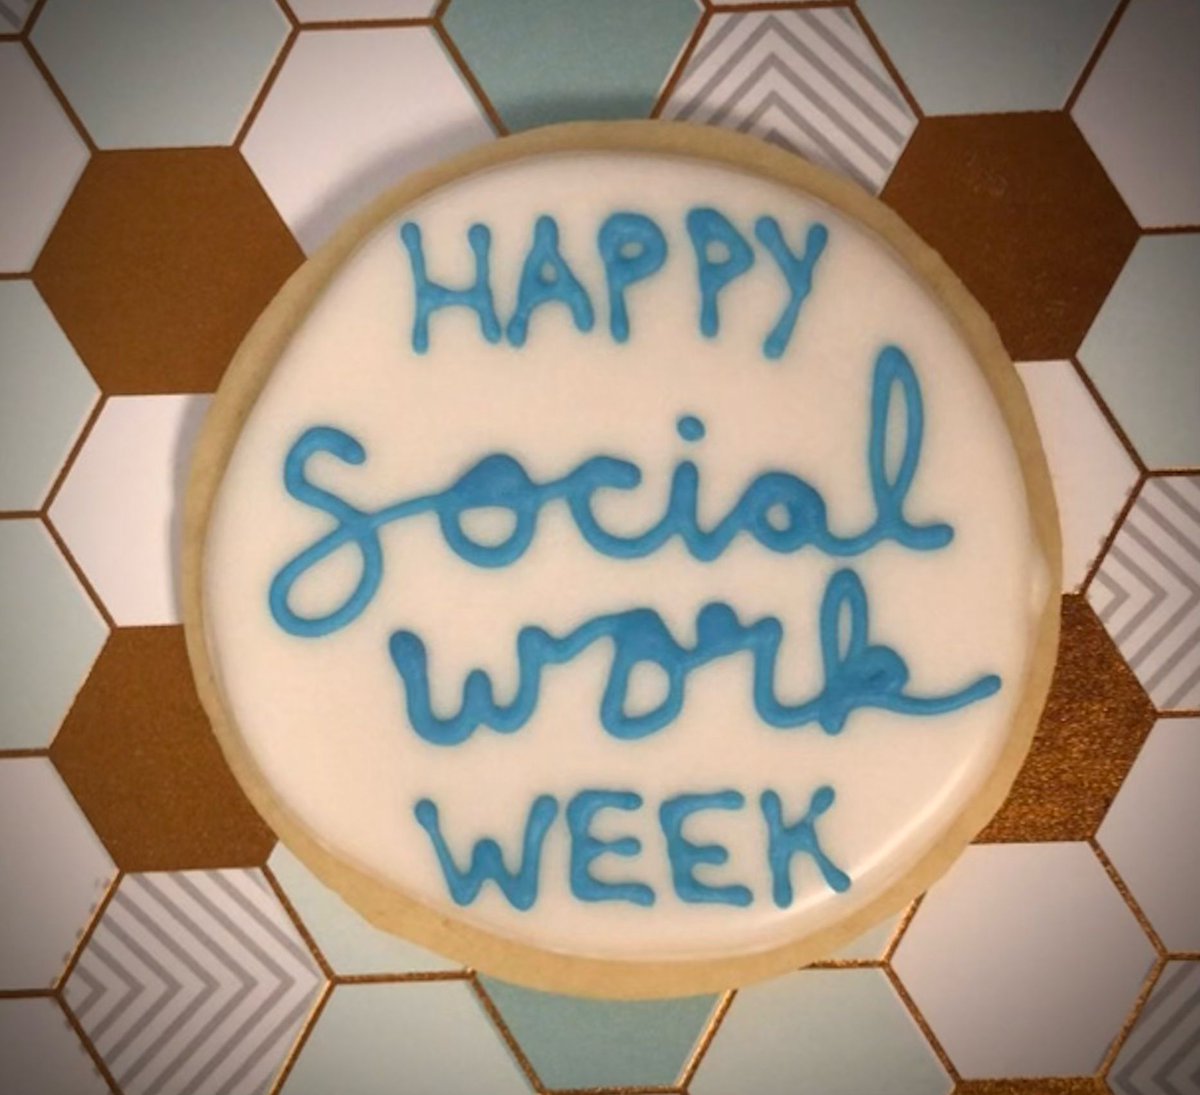 #SocialWorkMonth2022 is almost over but @UHN’s #SocialWorkers and #SocialServiceWorkers work hard to serve our patients year round. 

Our colleagues created edible art and an office advocacy door earlier this month to celebrate!

#HiddenTalentsofUHNSWandSSW